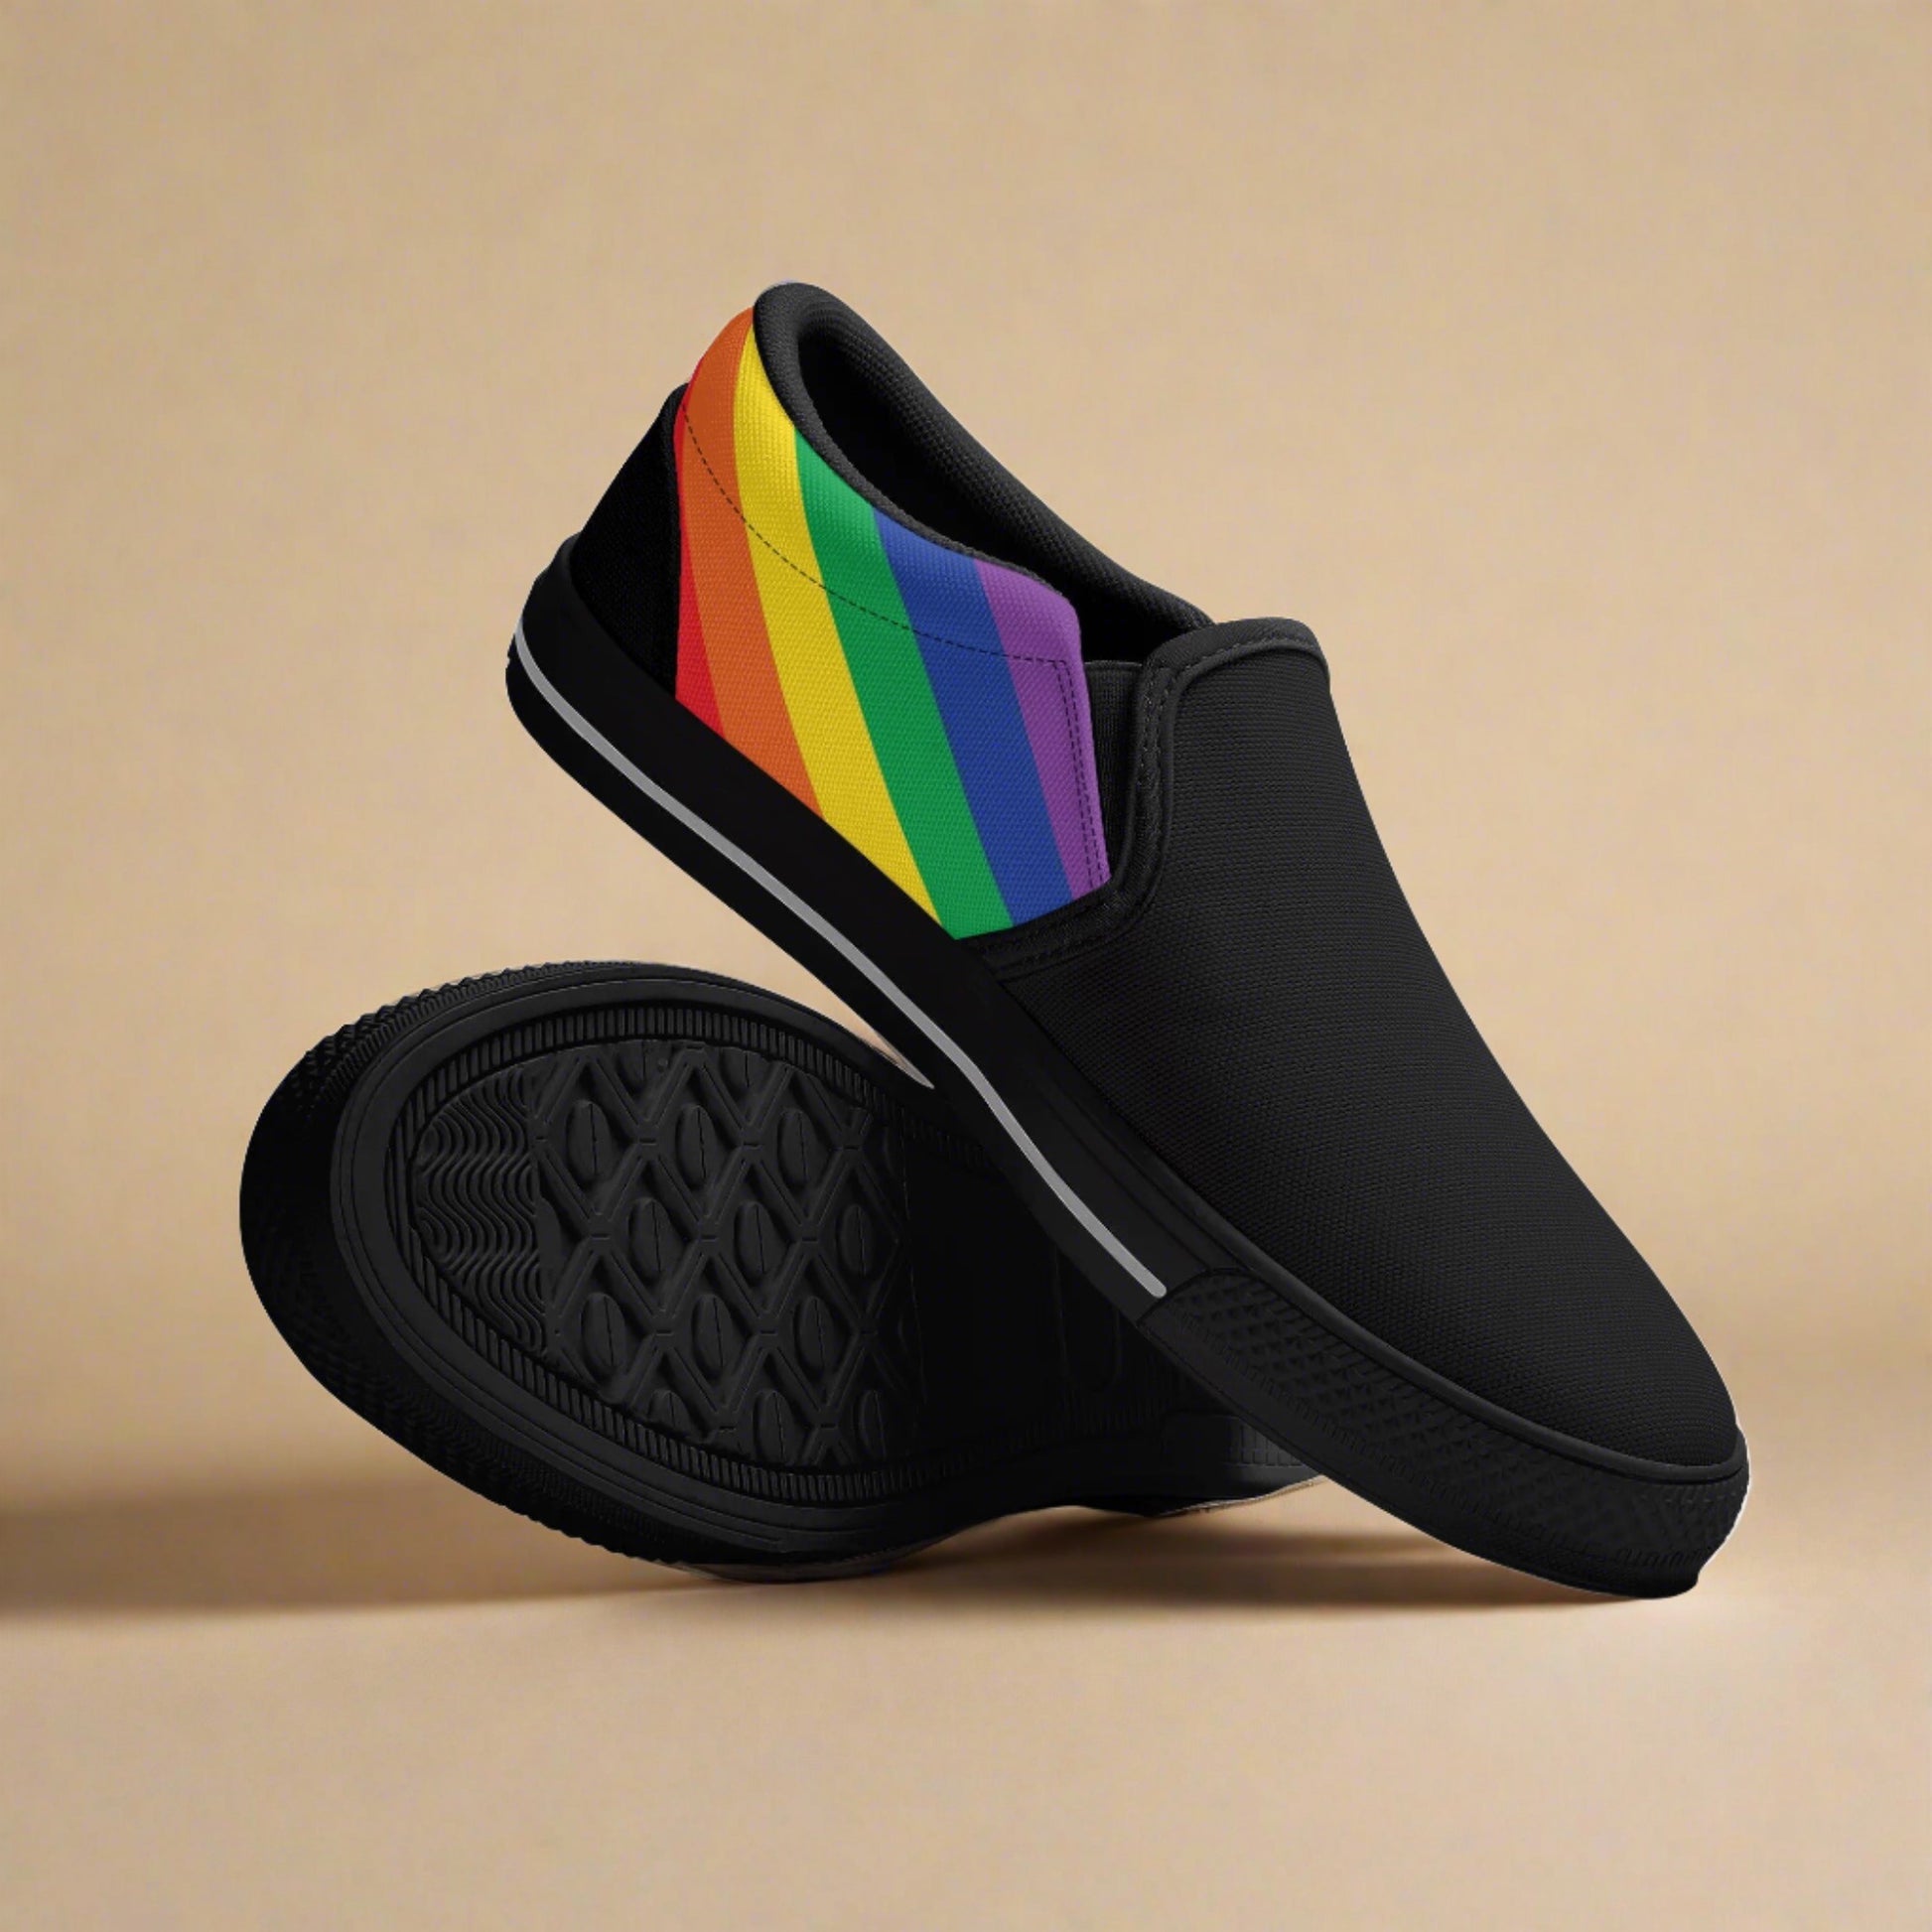 Black Rainbow LGBT Not A Phase Slip-On Mens Sneakers - Rose Gold Co. Shop